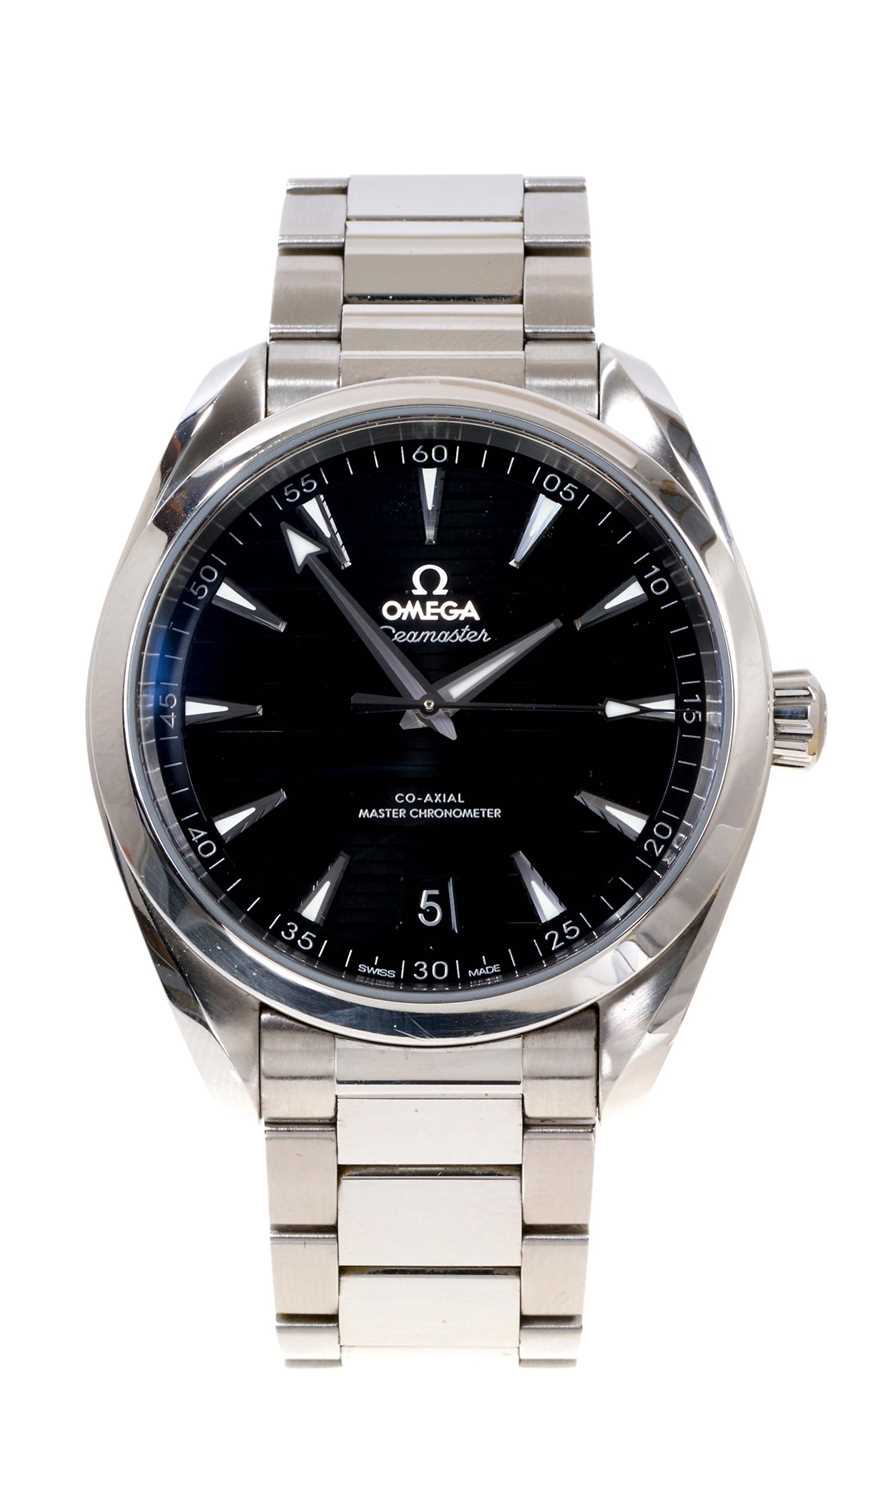 Fine Gentlemen’s modern Omega Seamaster Co-Axial Master Chronometer wristwatch with box and papers